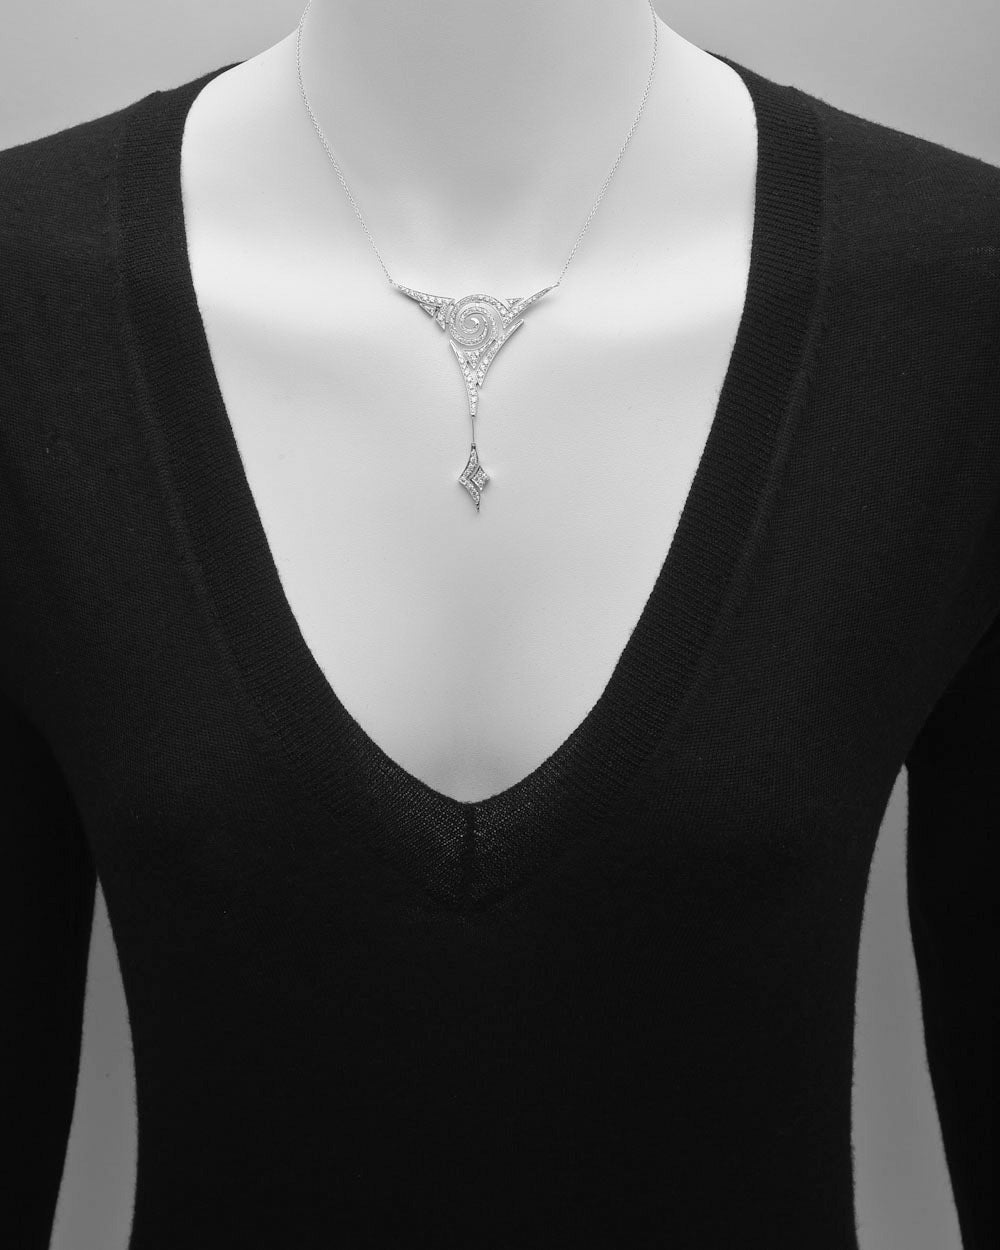 Diamond pendant necklace, designed as a 'V'-shaped pavé diamond pendant centering an open 'swirl' motif, with 99 round diamonds weighing approximately 1.50 total carats, mounted in 18k white gold, on a 16